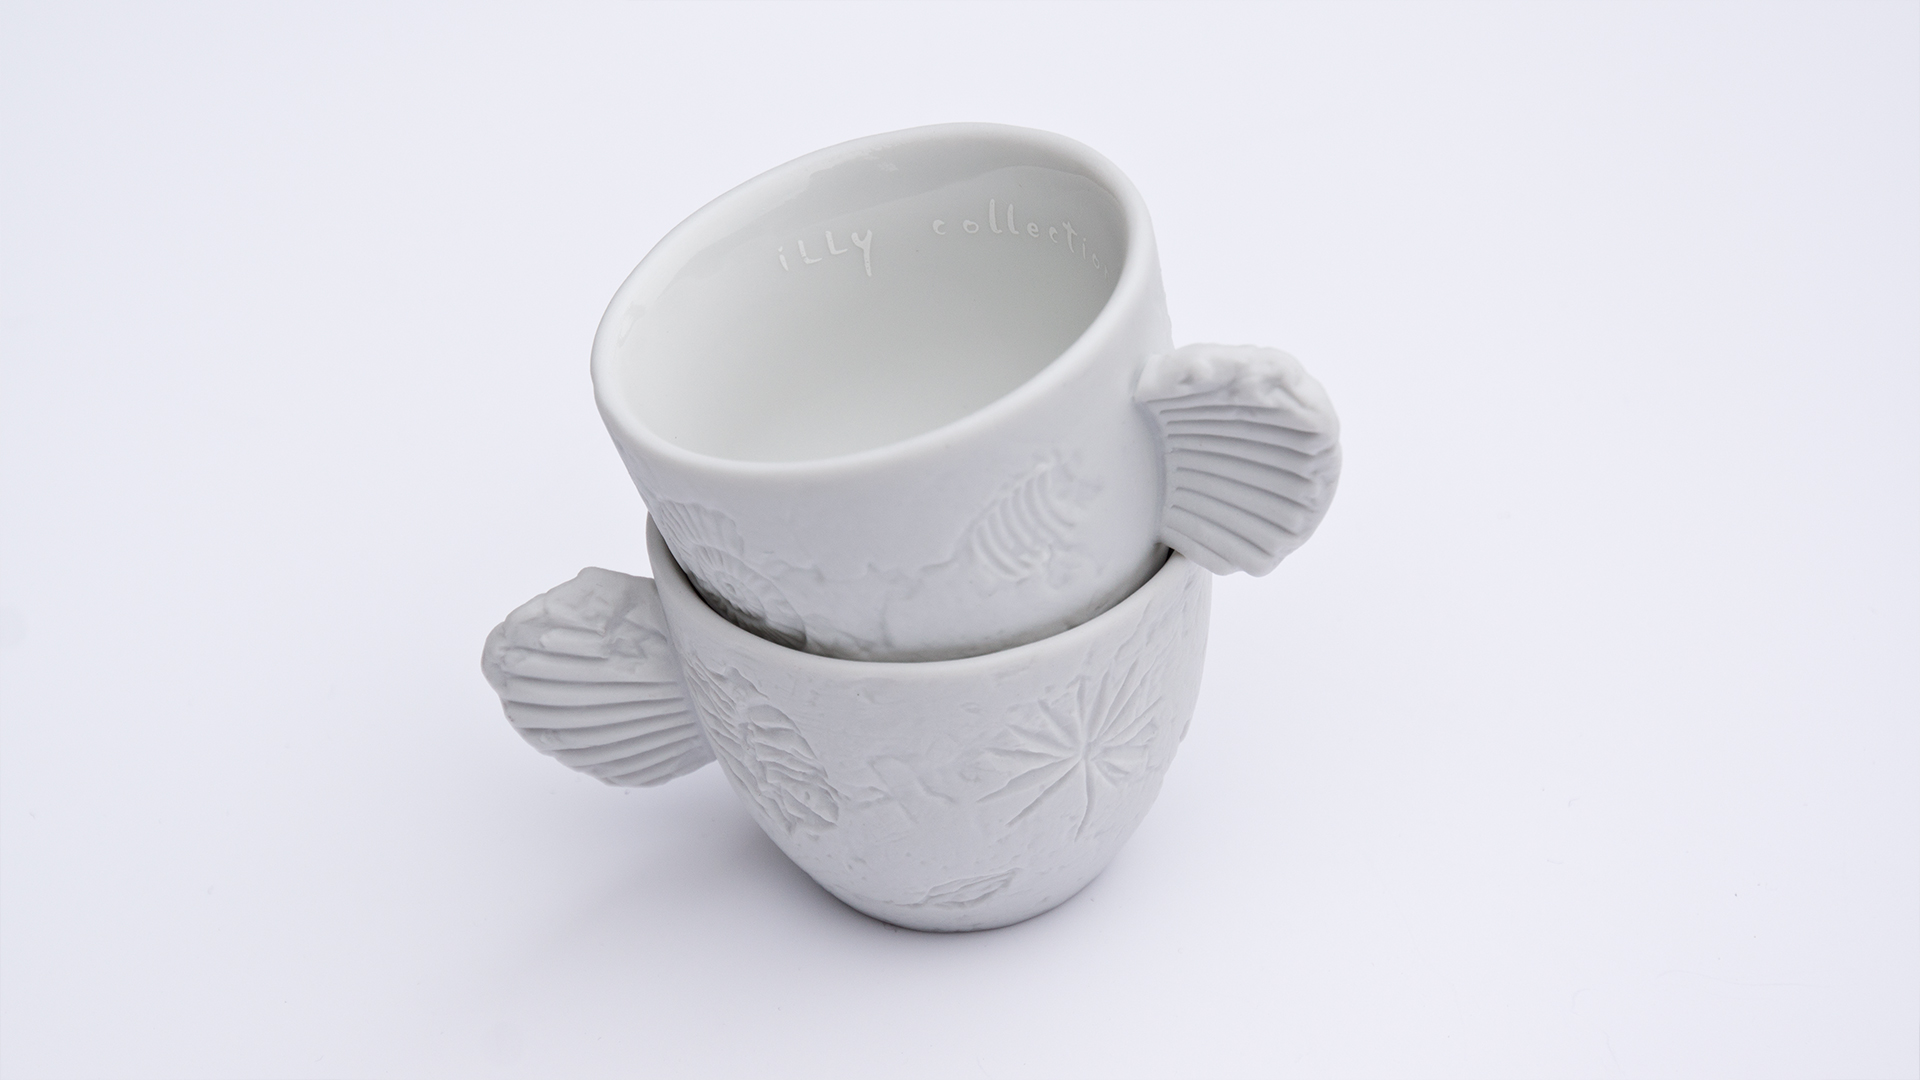 Illy cup collection Fossile a Rossetti brand design